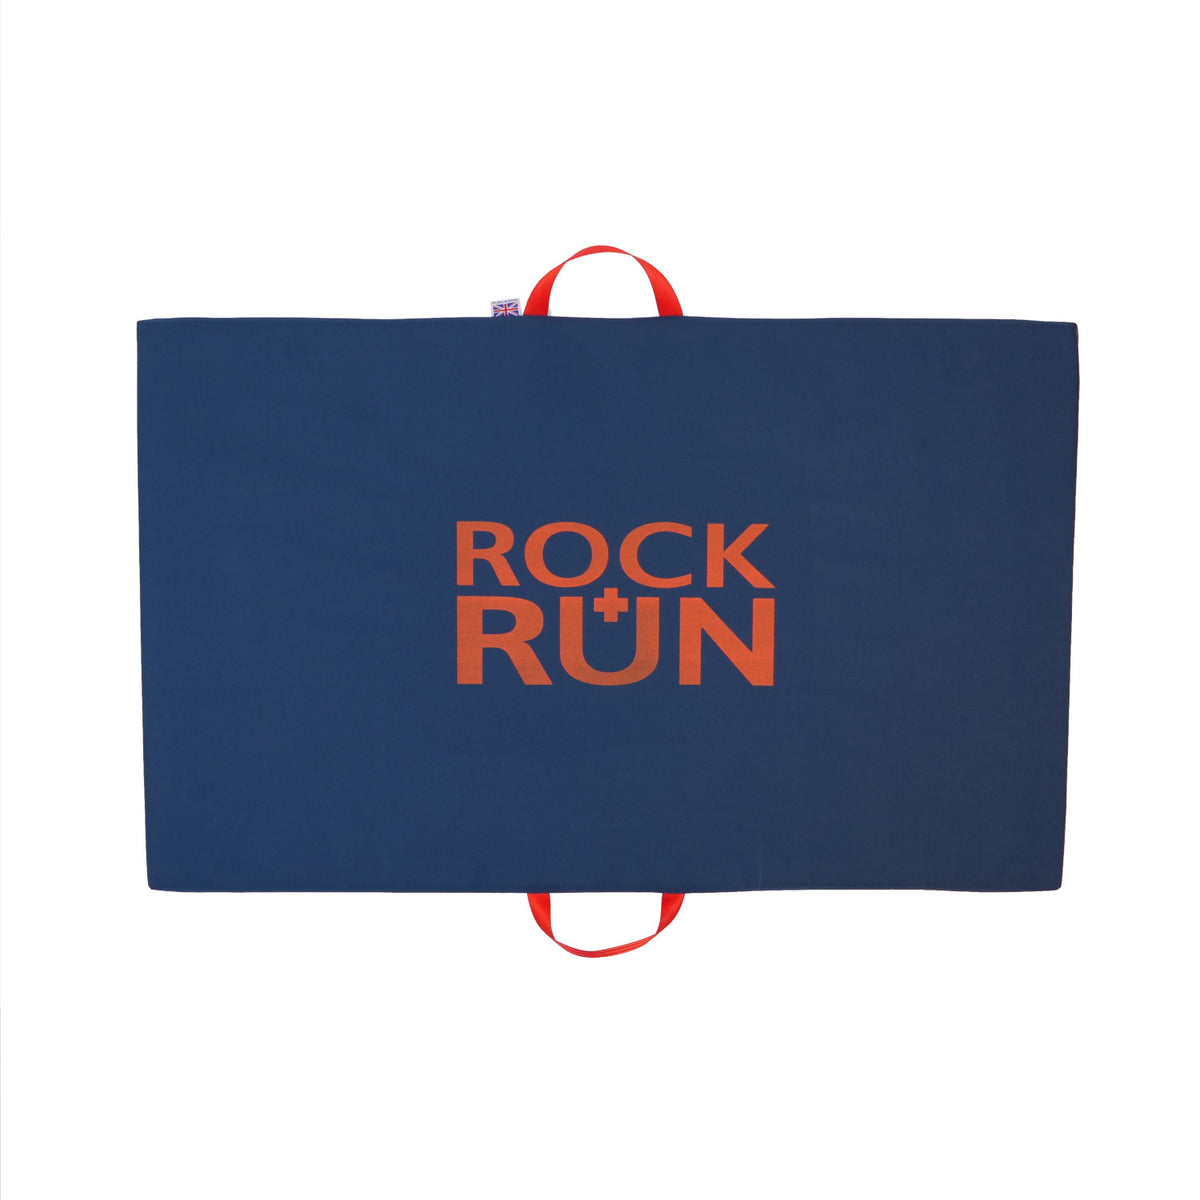 Rock + Run Showdown Pad in slate grey colour with red logo